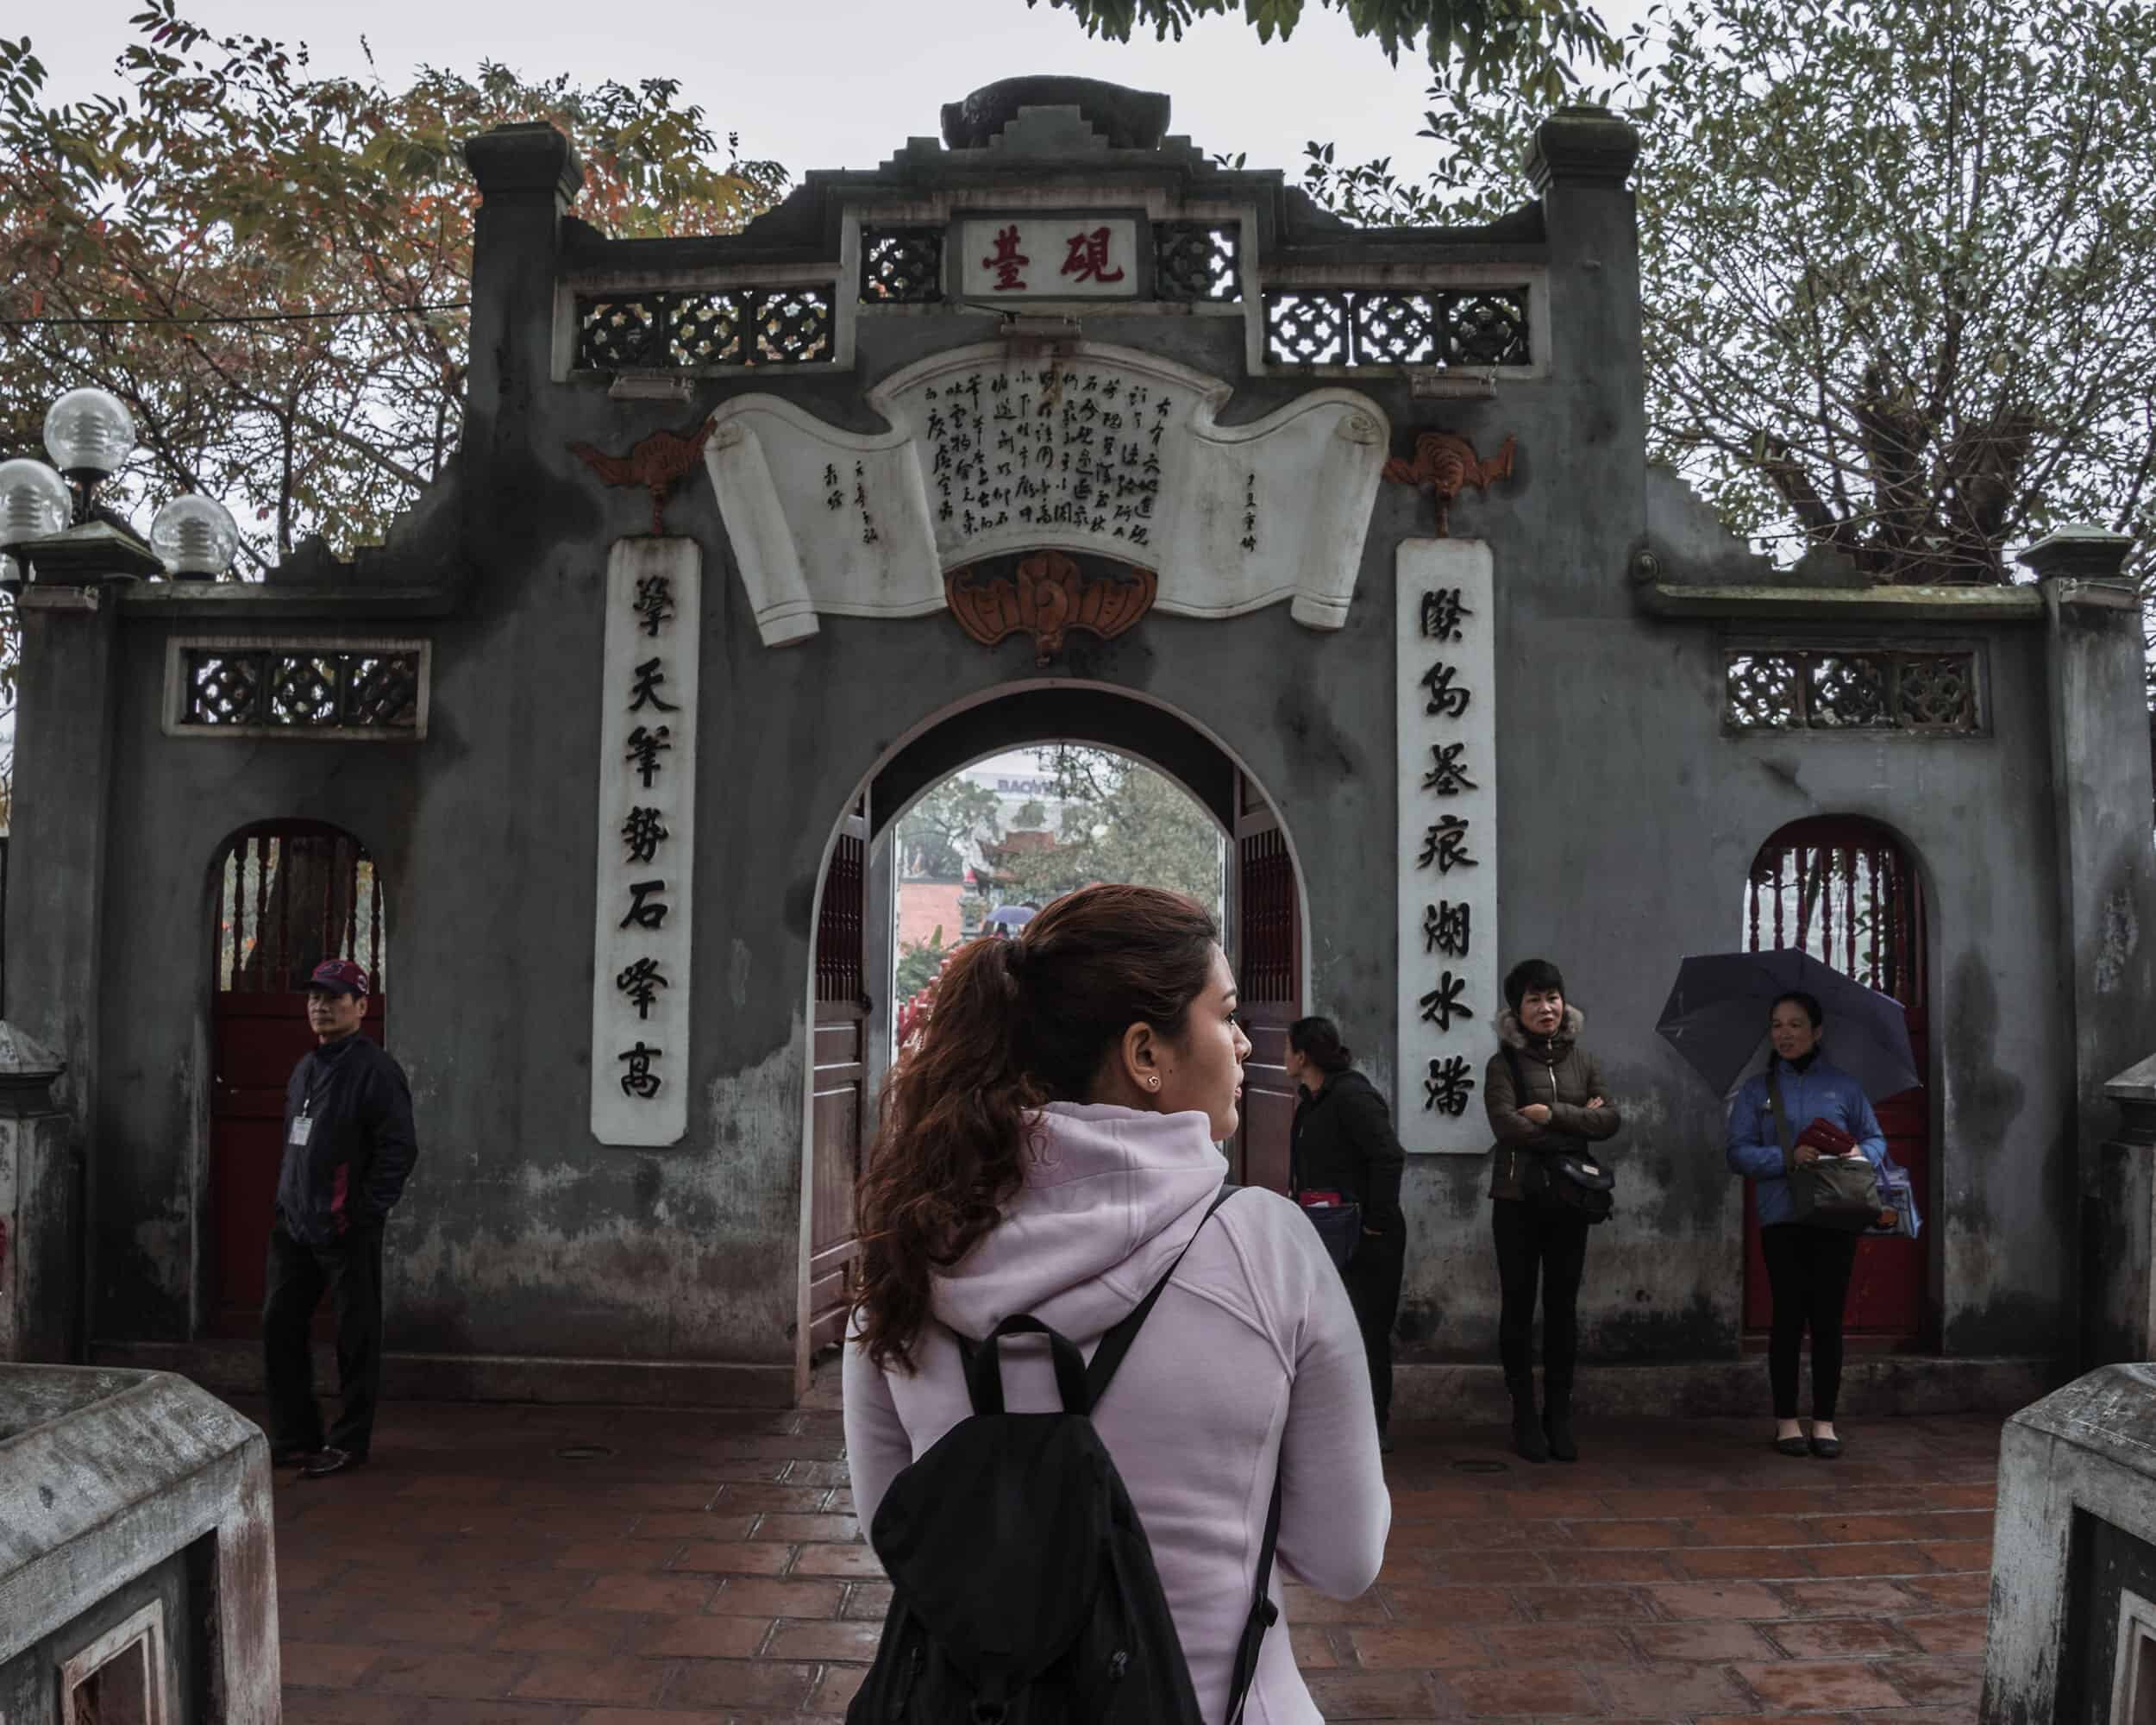 Entrance of Ngoc Son Temple